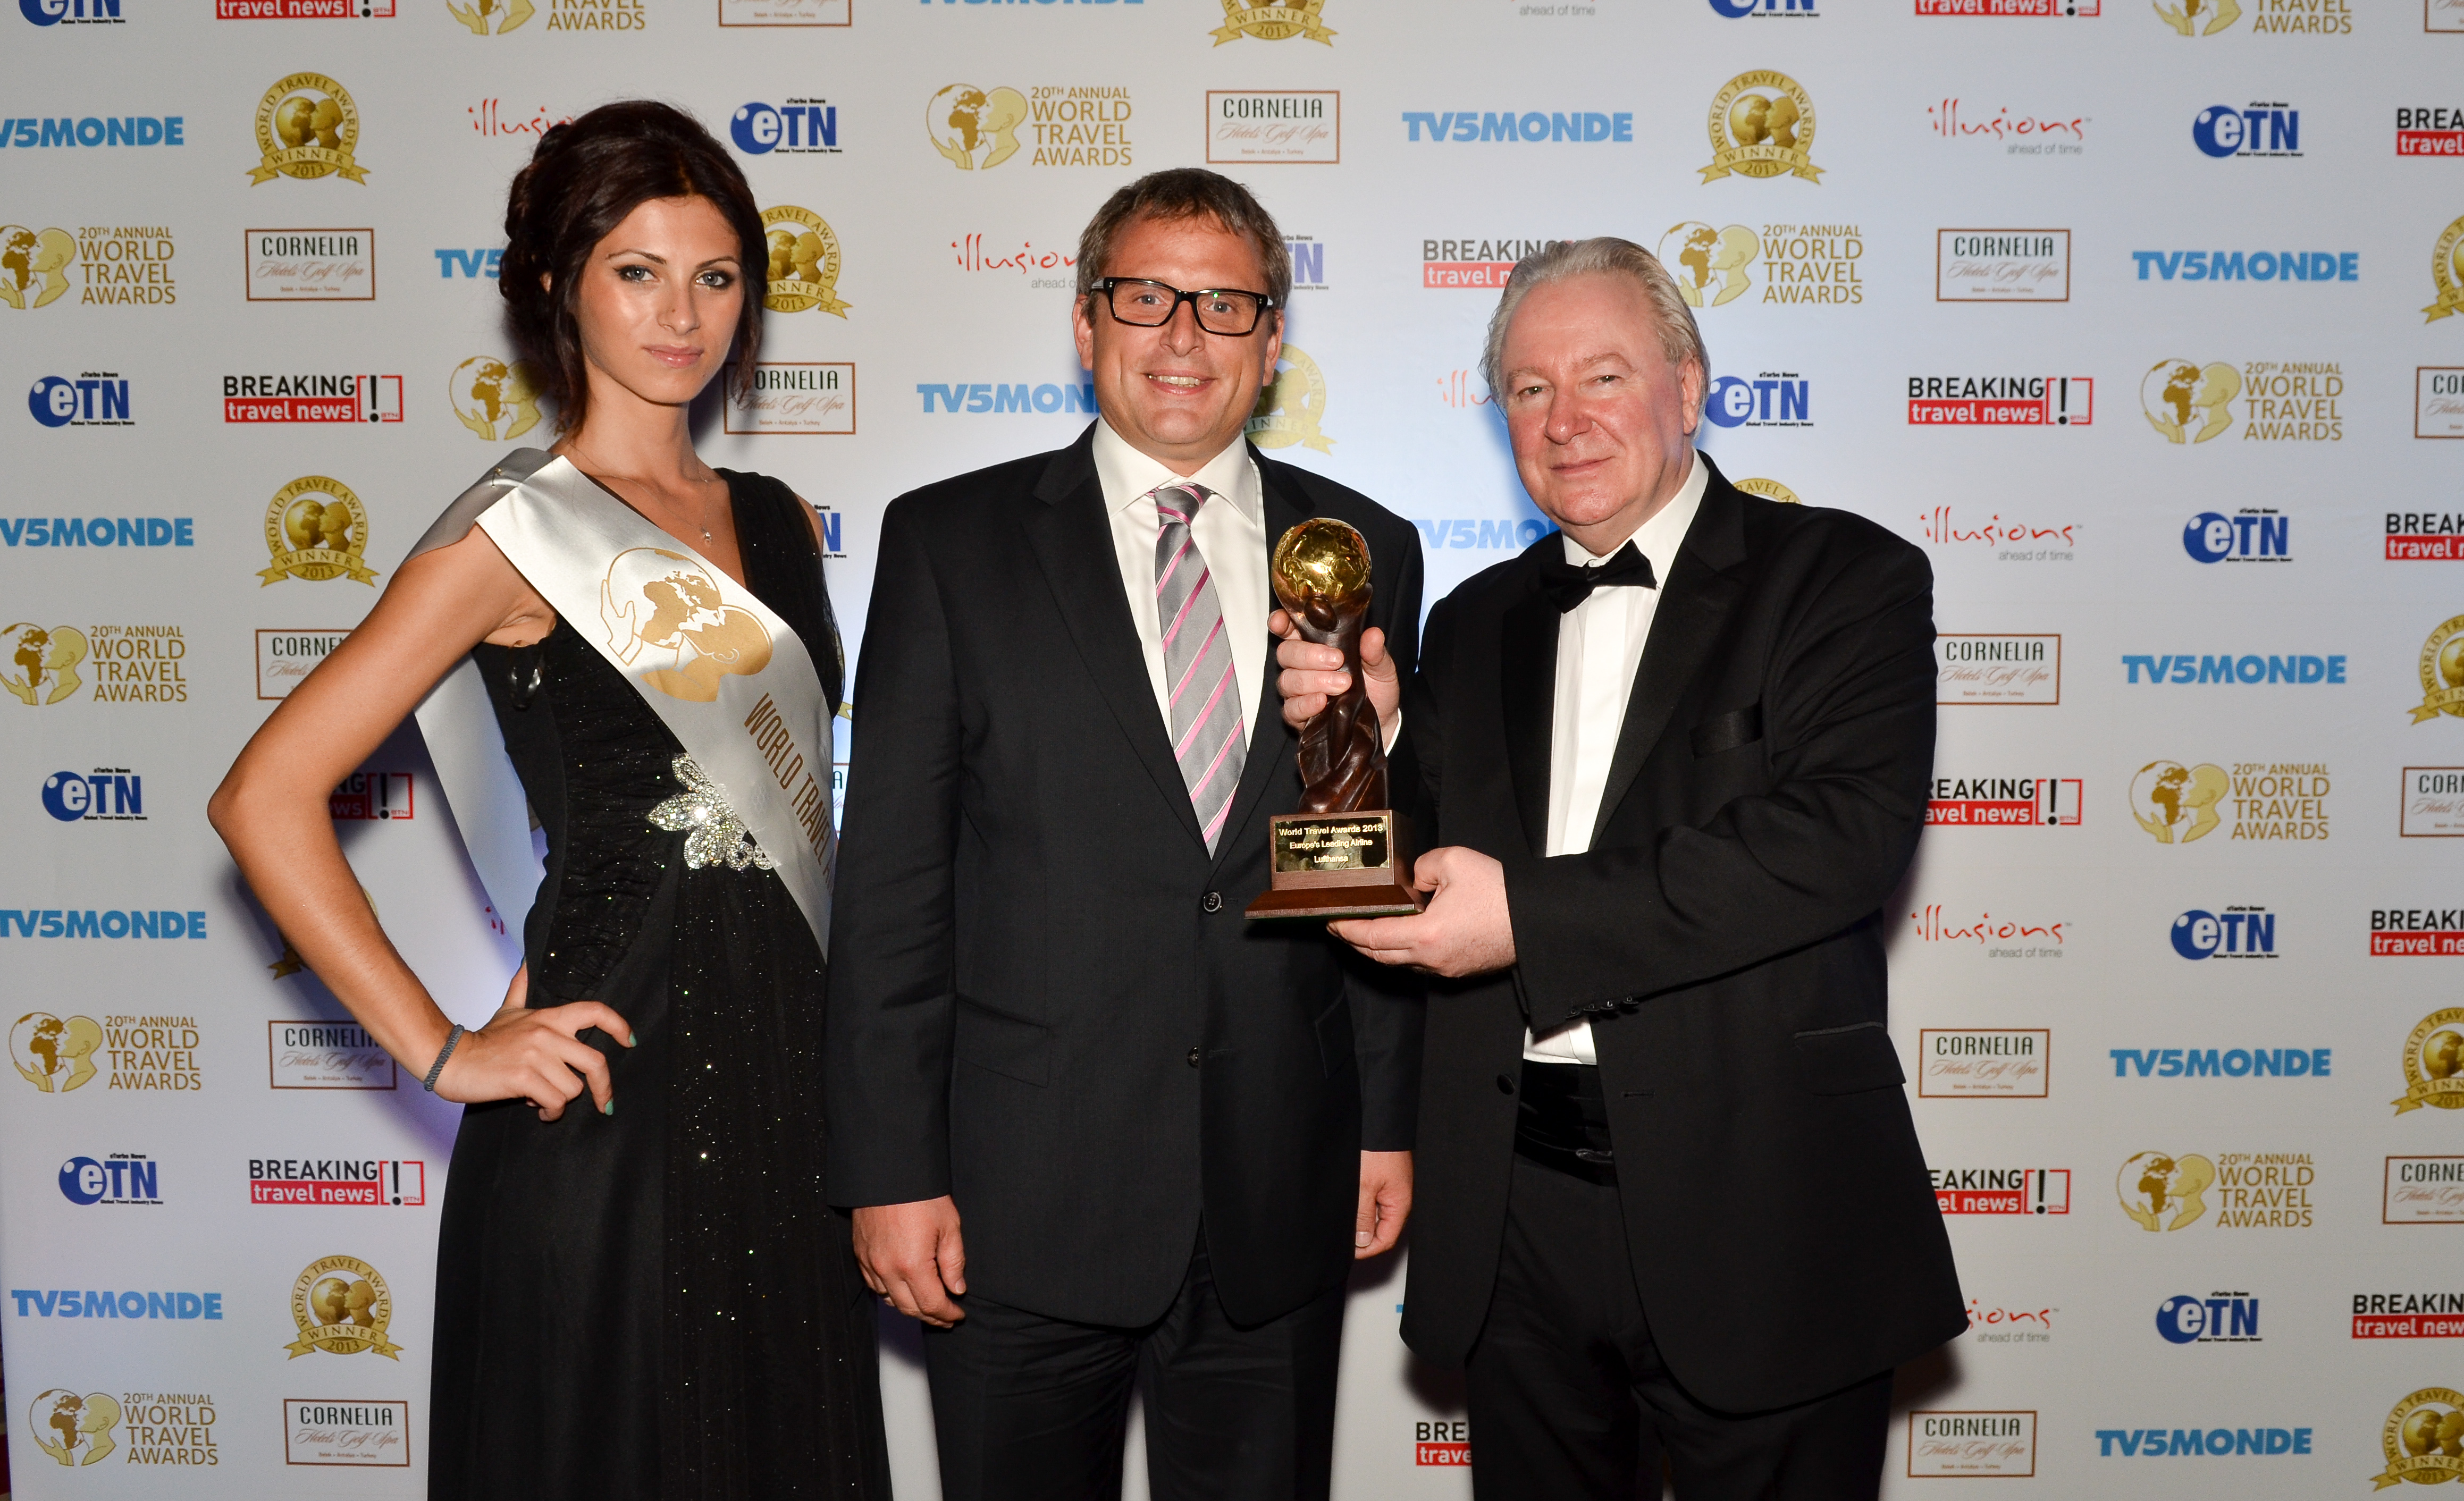 Graham E. Cooke, President and Founder, World Travel Awards (on the right) celebrates the award handover with Lufthansa’s General Manager Turkey, Stefan Loecherbach.